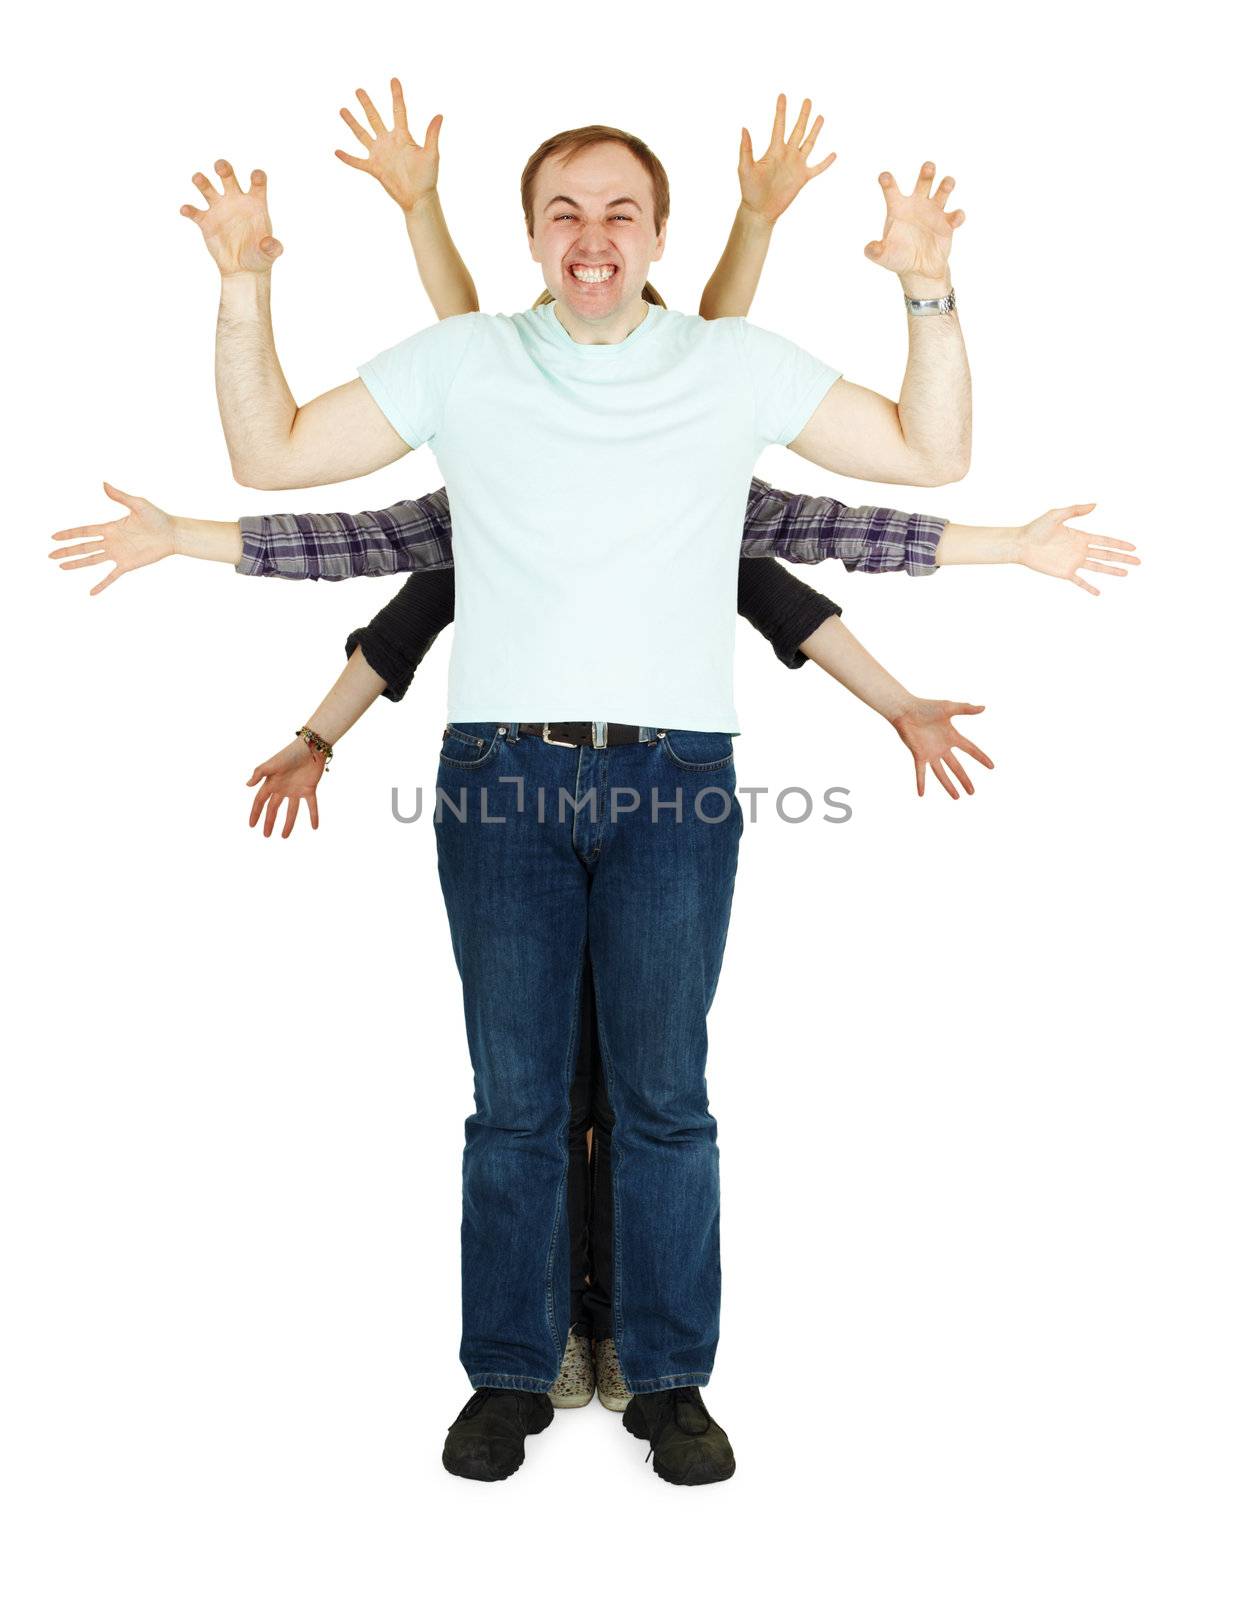 The family plays the fool representing multiarmed god isolated on white background